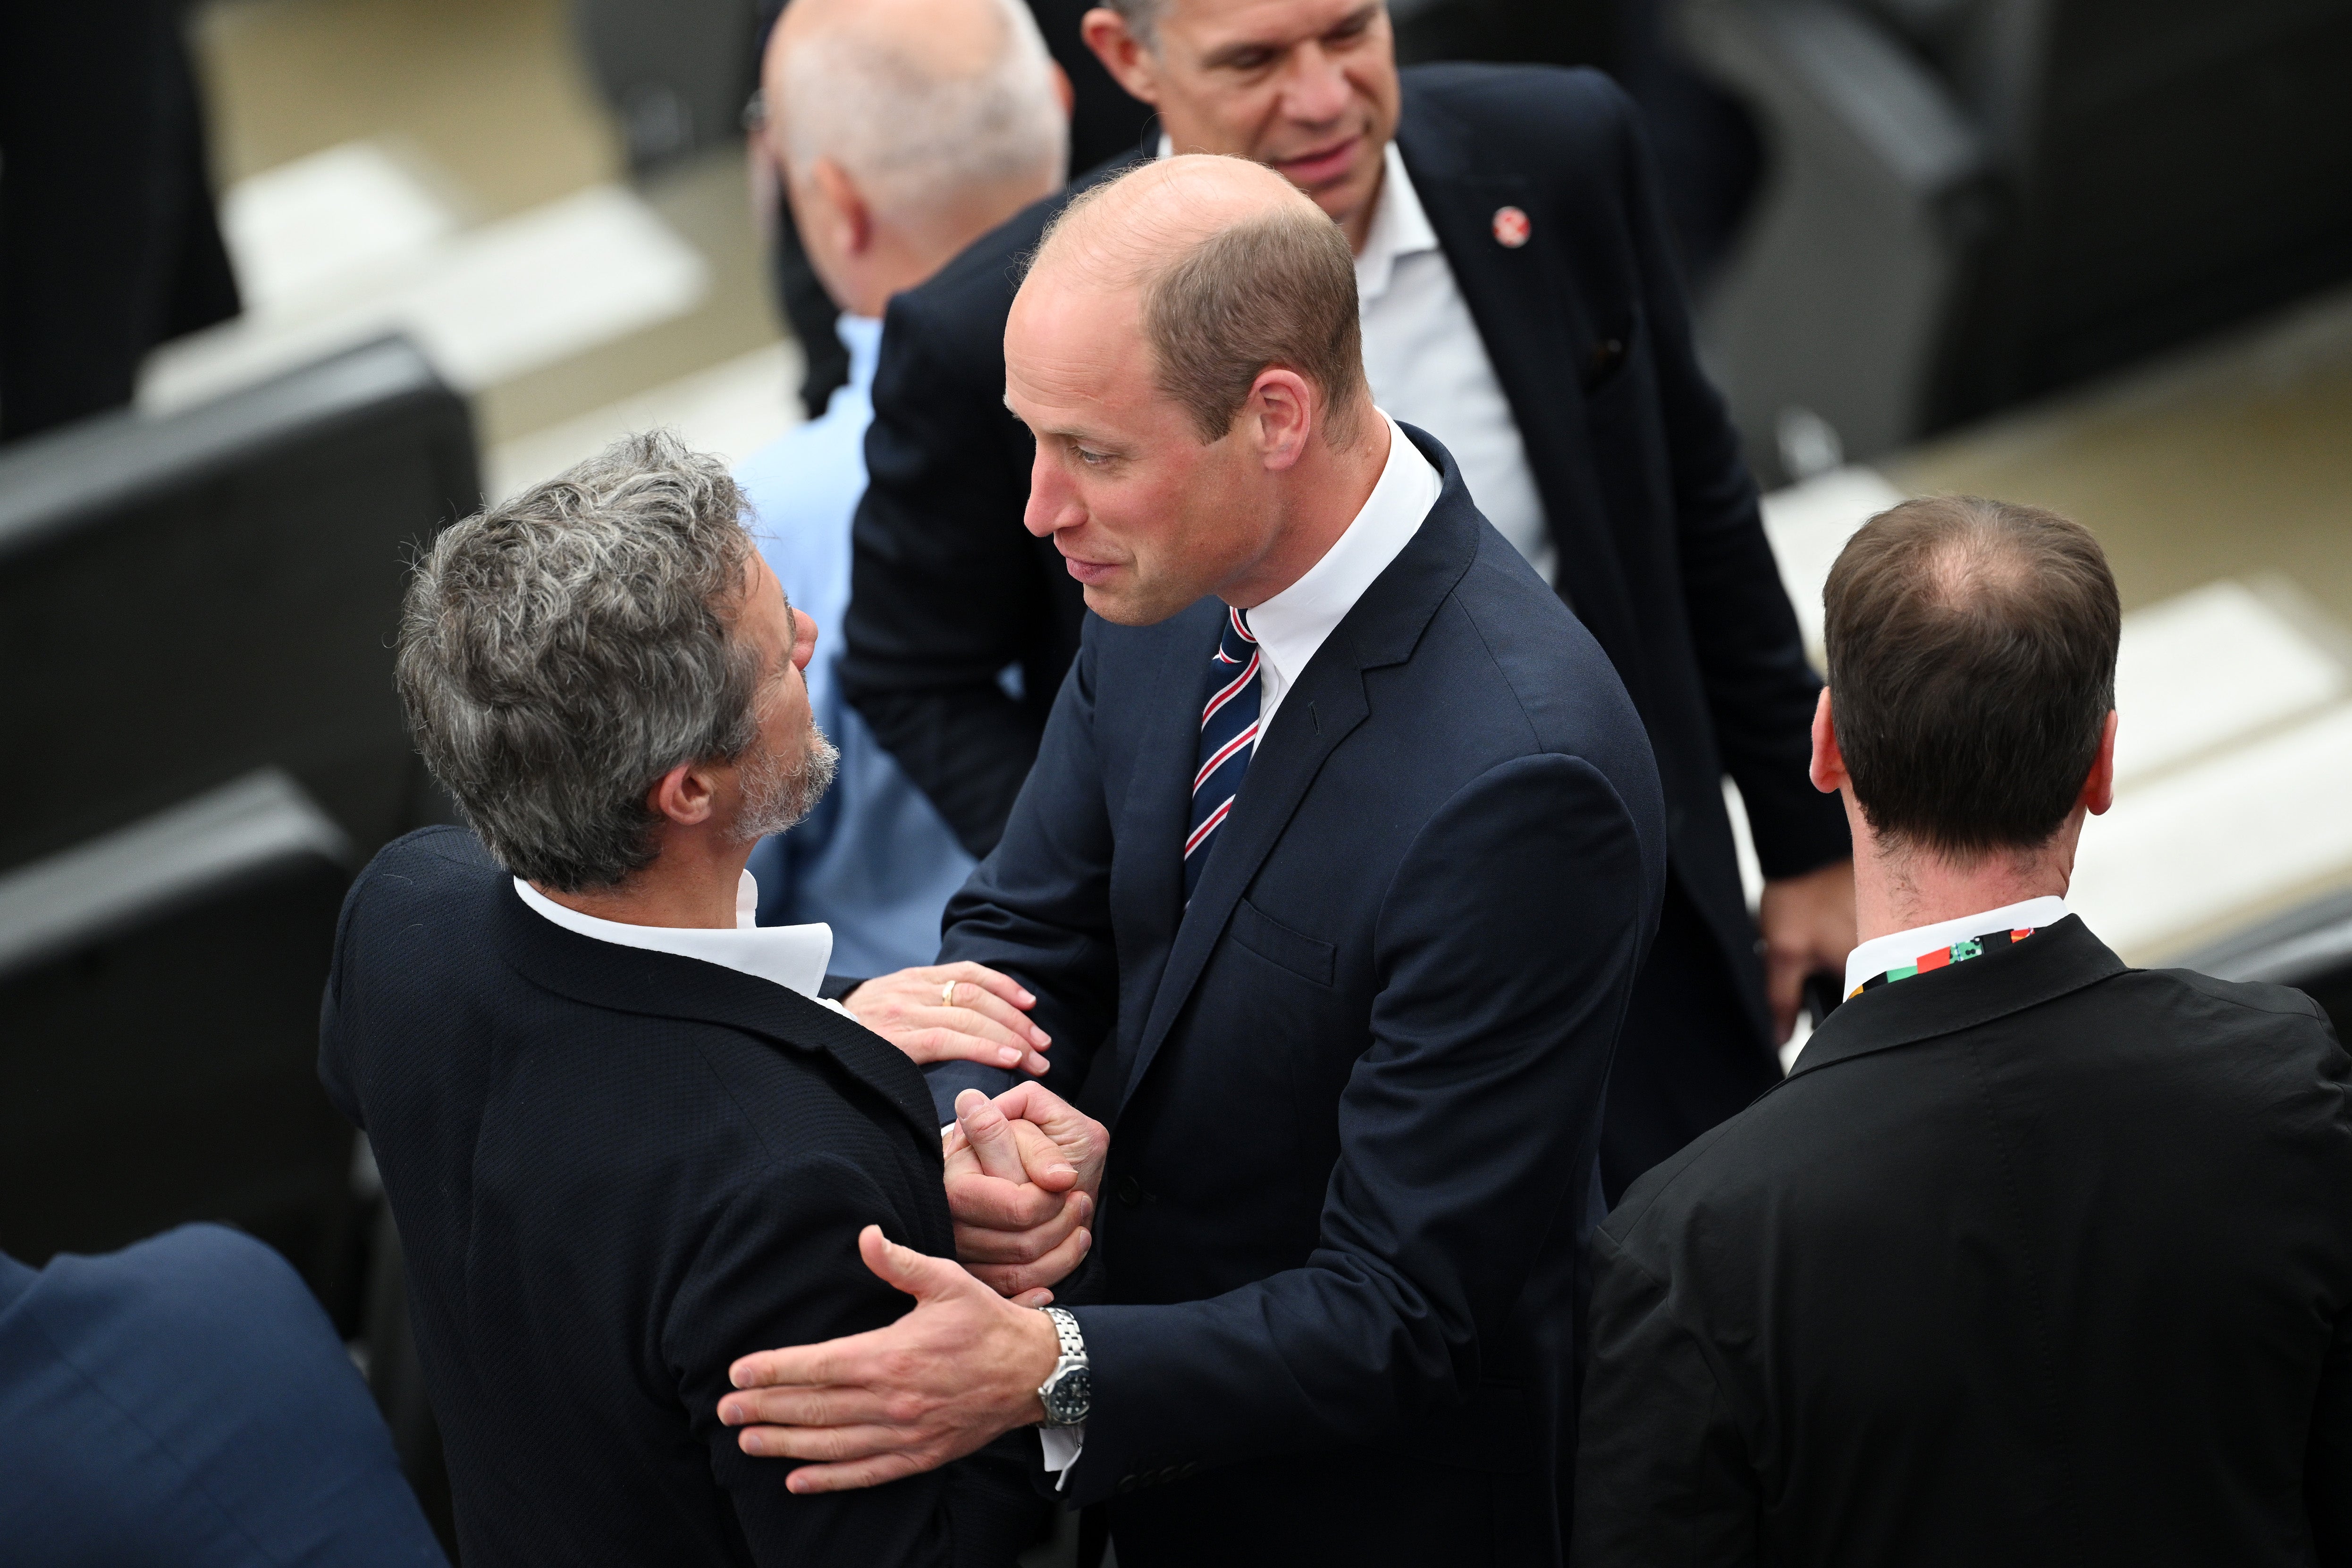 Prince William is the president of the FA.